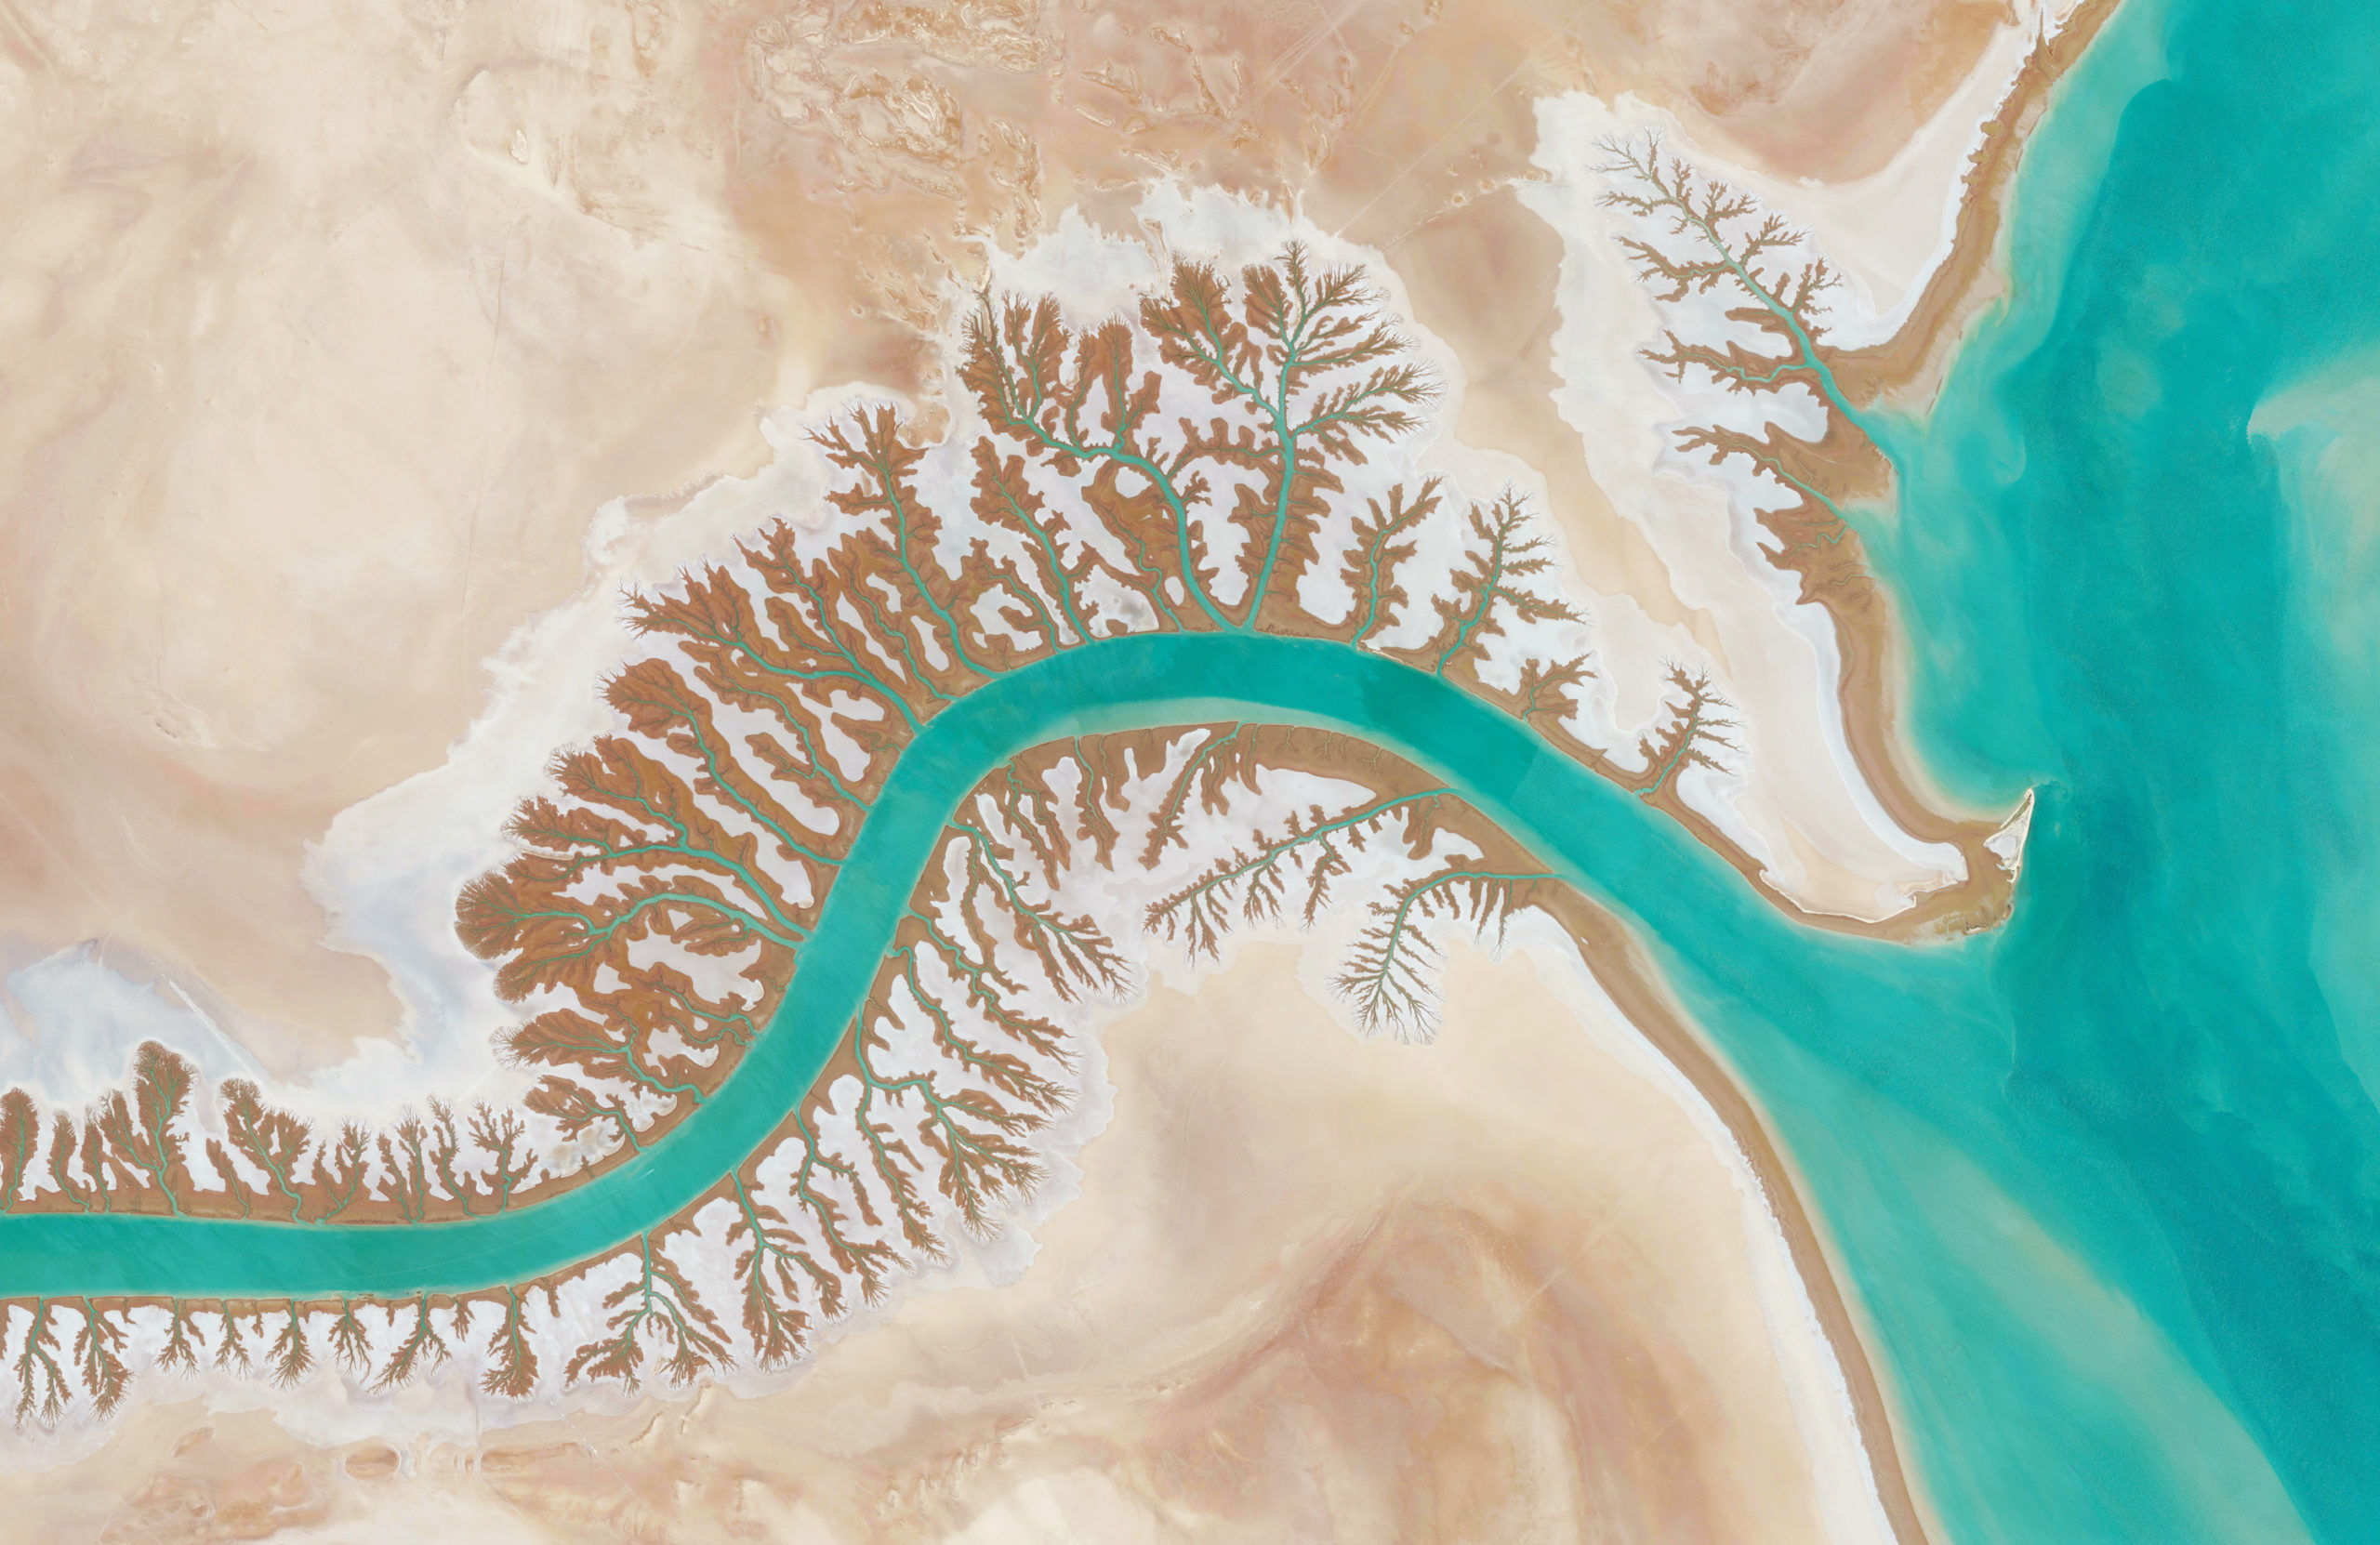 SHADEGAN LAGOON 30·327274°, 48·829255° Reprinted with permission from Overview by Benjamin Grant, copyright (c) 2016. Images (c) 2016 by DigitalGlobe, Inc. Published by Amphoto Books, a division of Penguin Random House, Inc. 